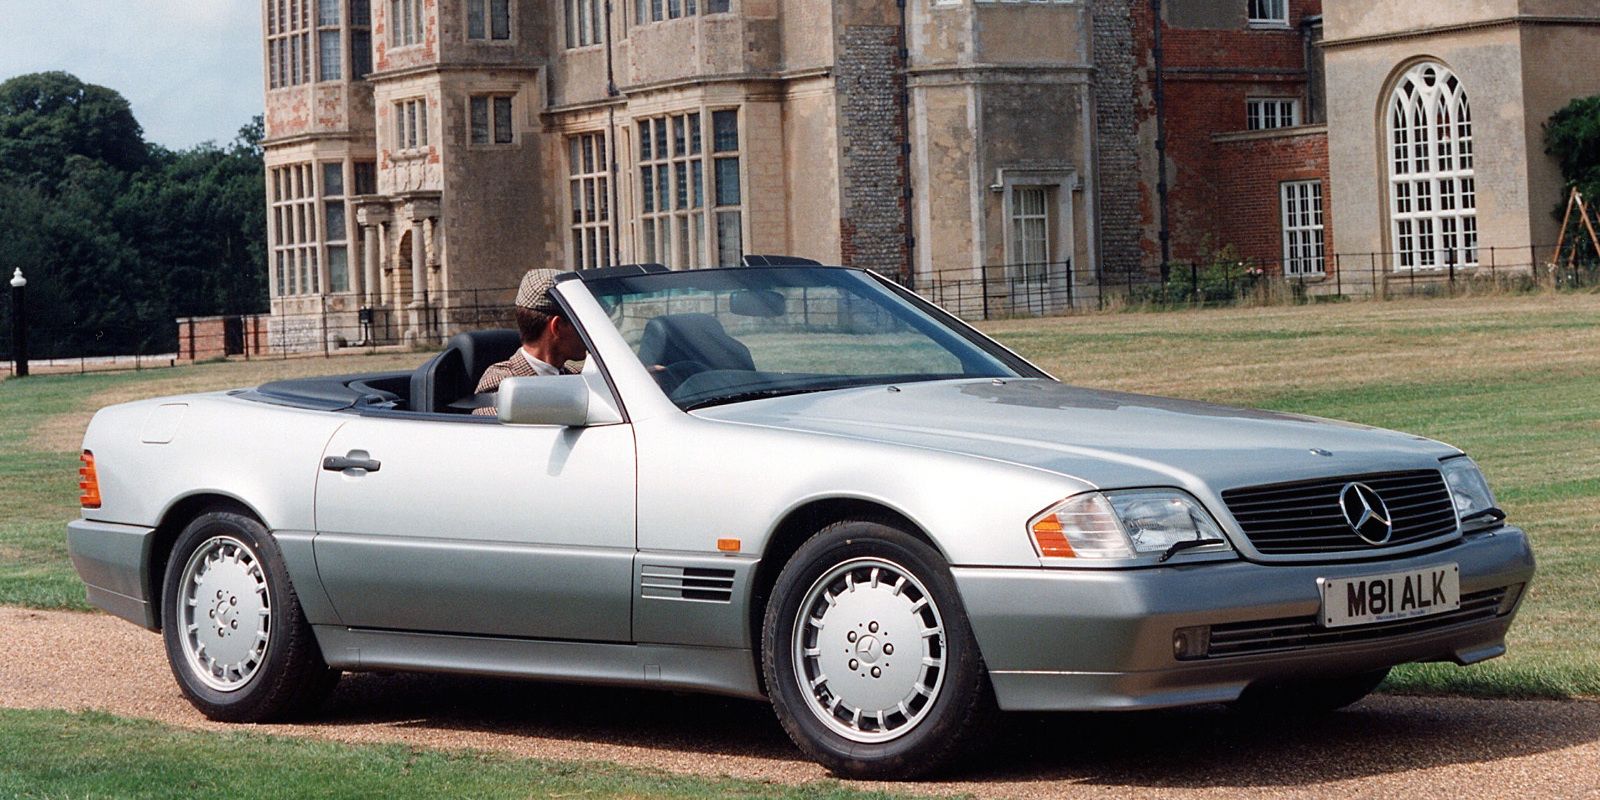 In 1990 The Mercedes Benz 500sl Was The Pinnacle Of Resplendent Luxury